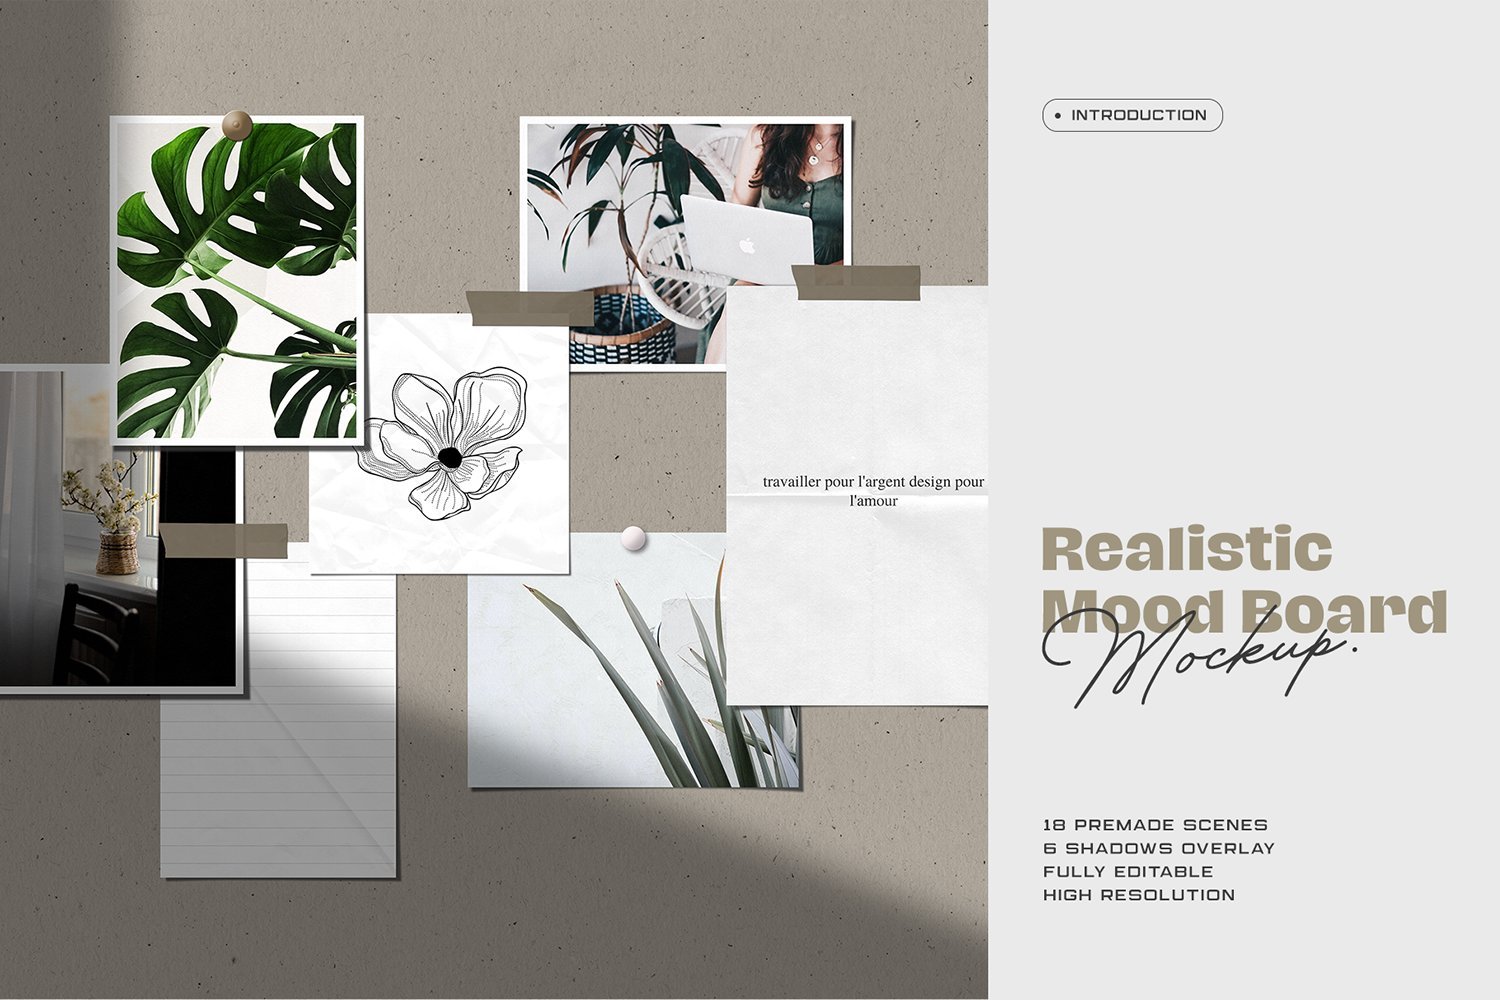 Download Download Realistic Moodboard Mockup - 4817444 - SoftArchive